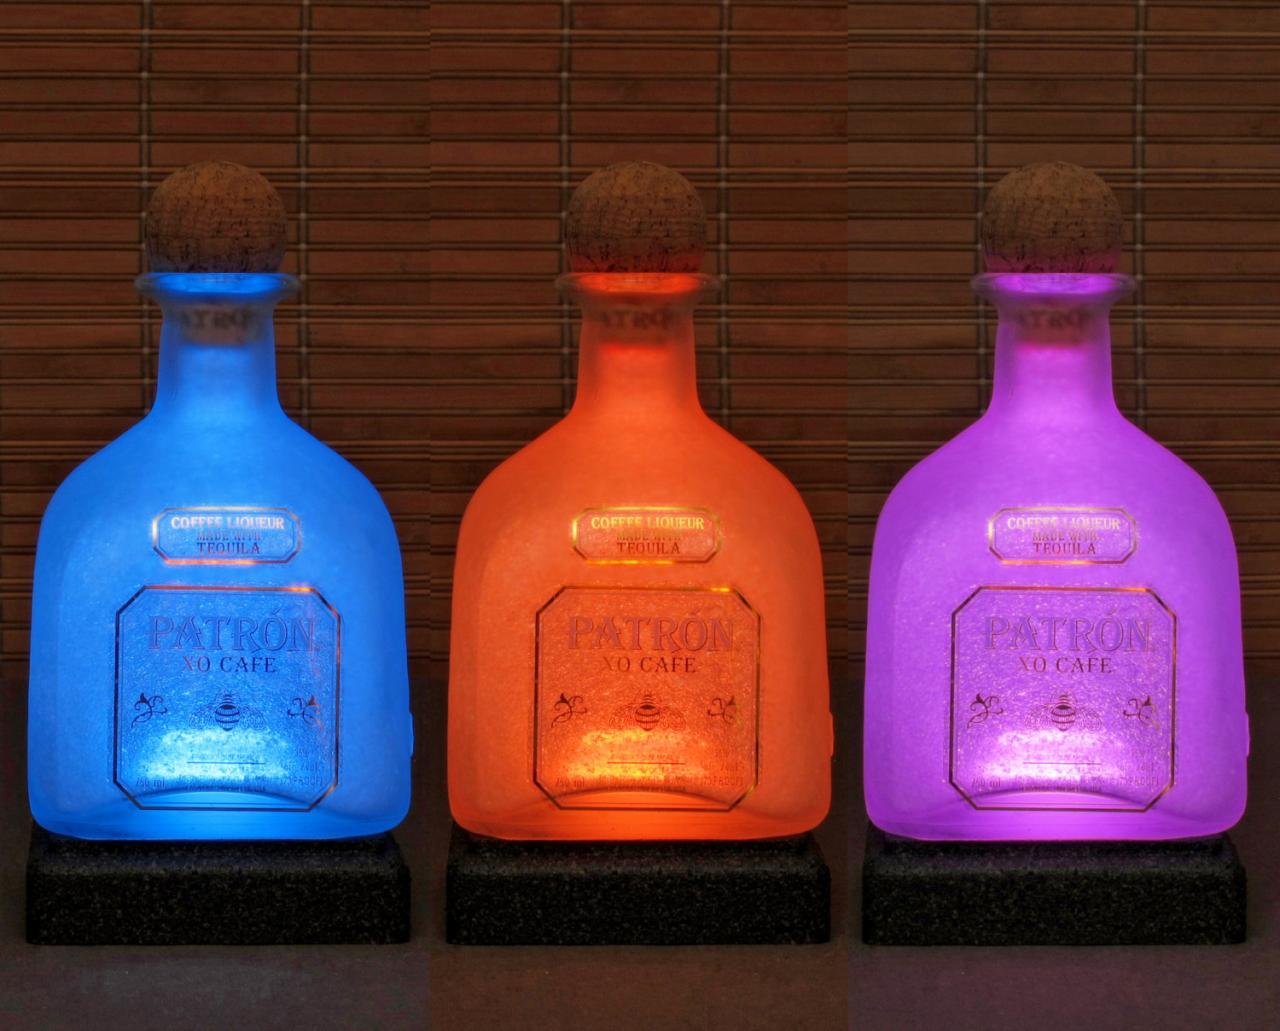 Patron Tequila Xo Cafe Coffee Big 1.75 Liter 16 Color Remote Control Lighted Bottle Lamp Bar Light Bodacious Bottles